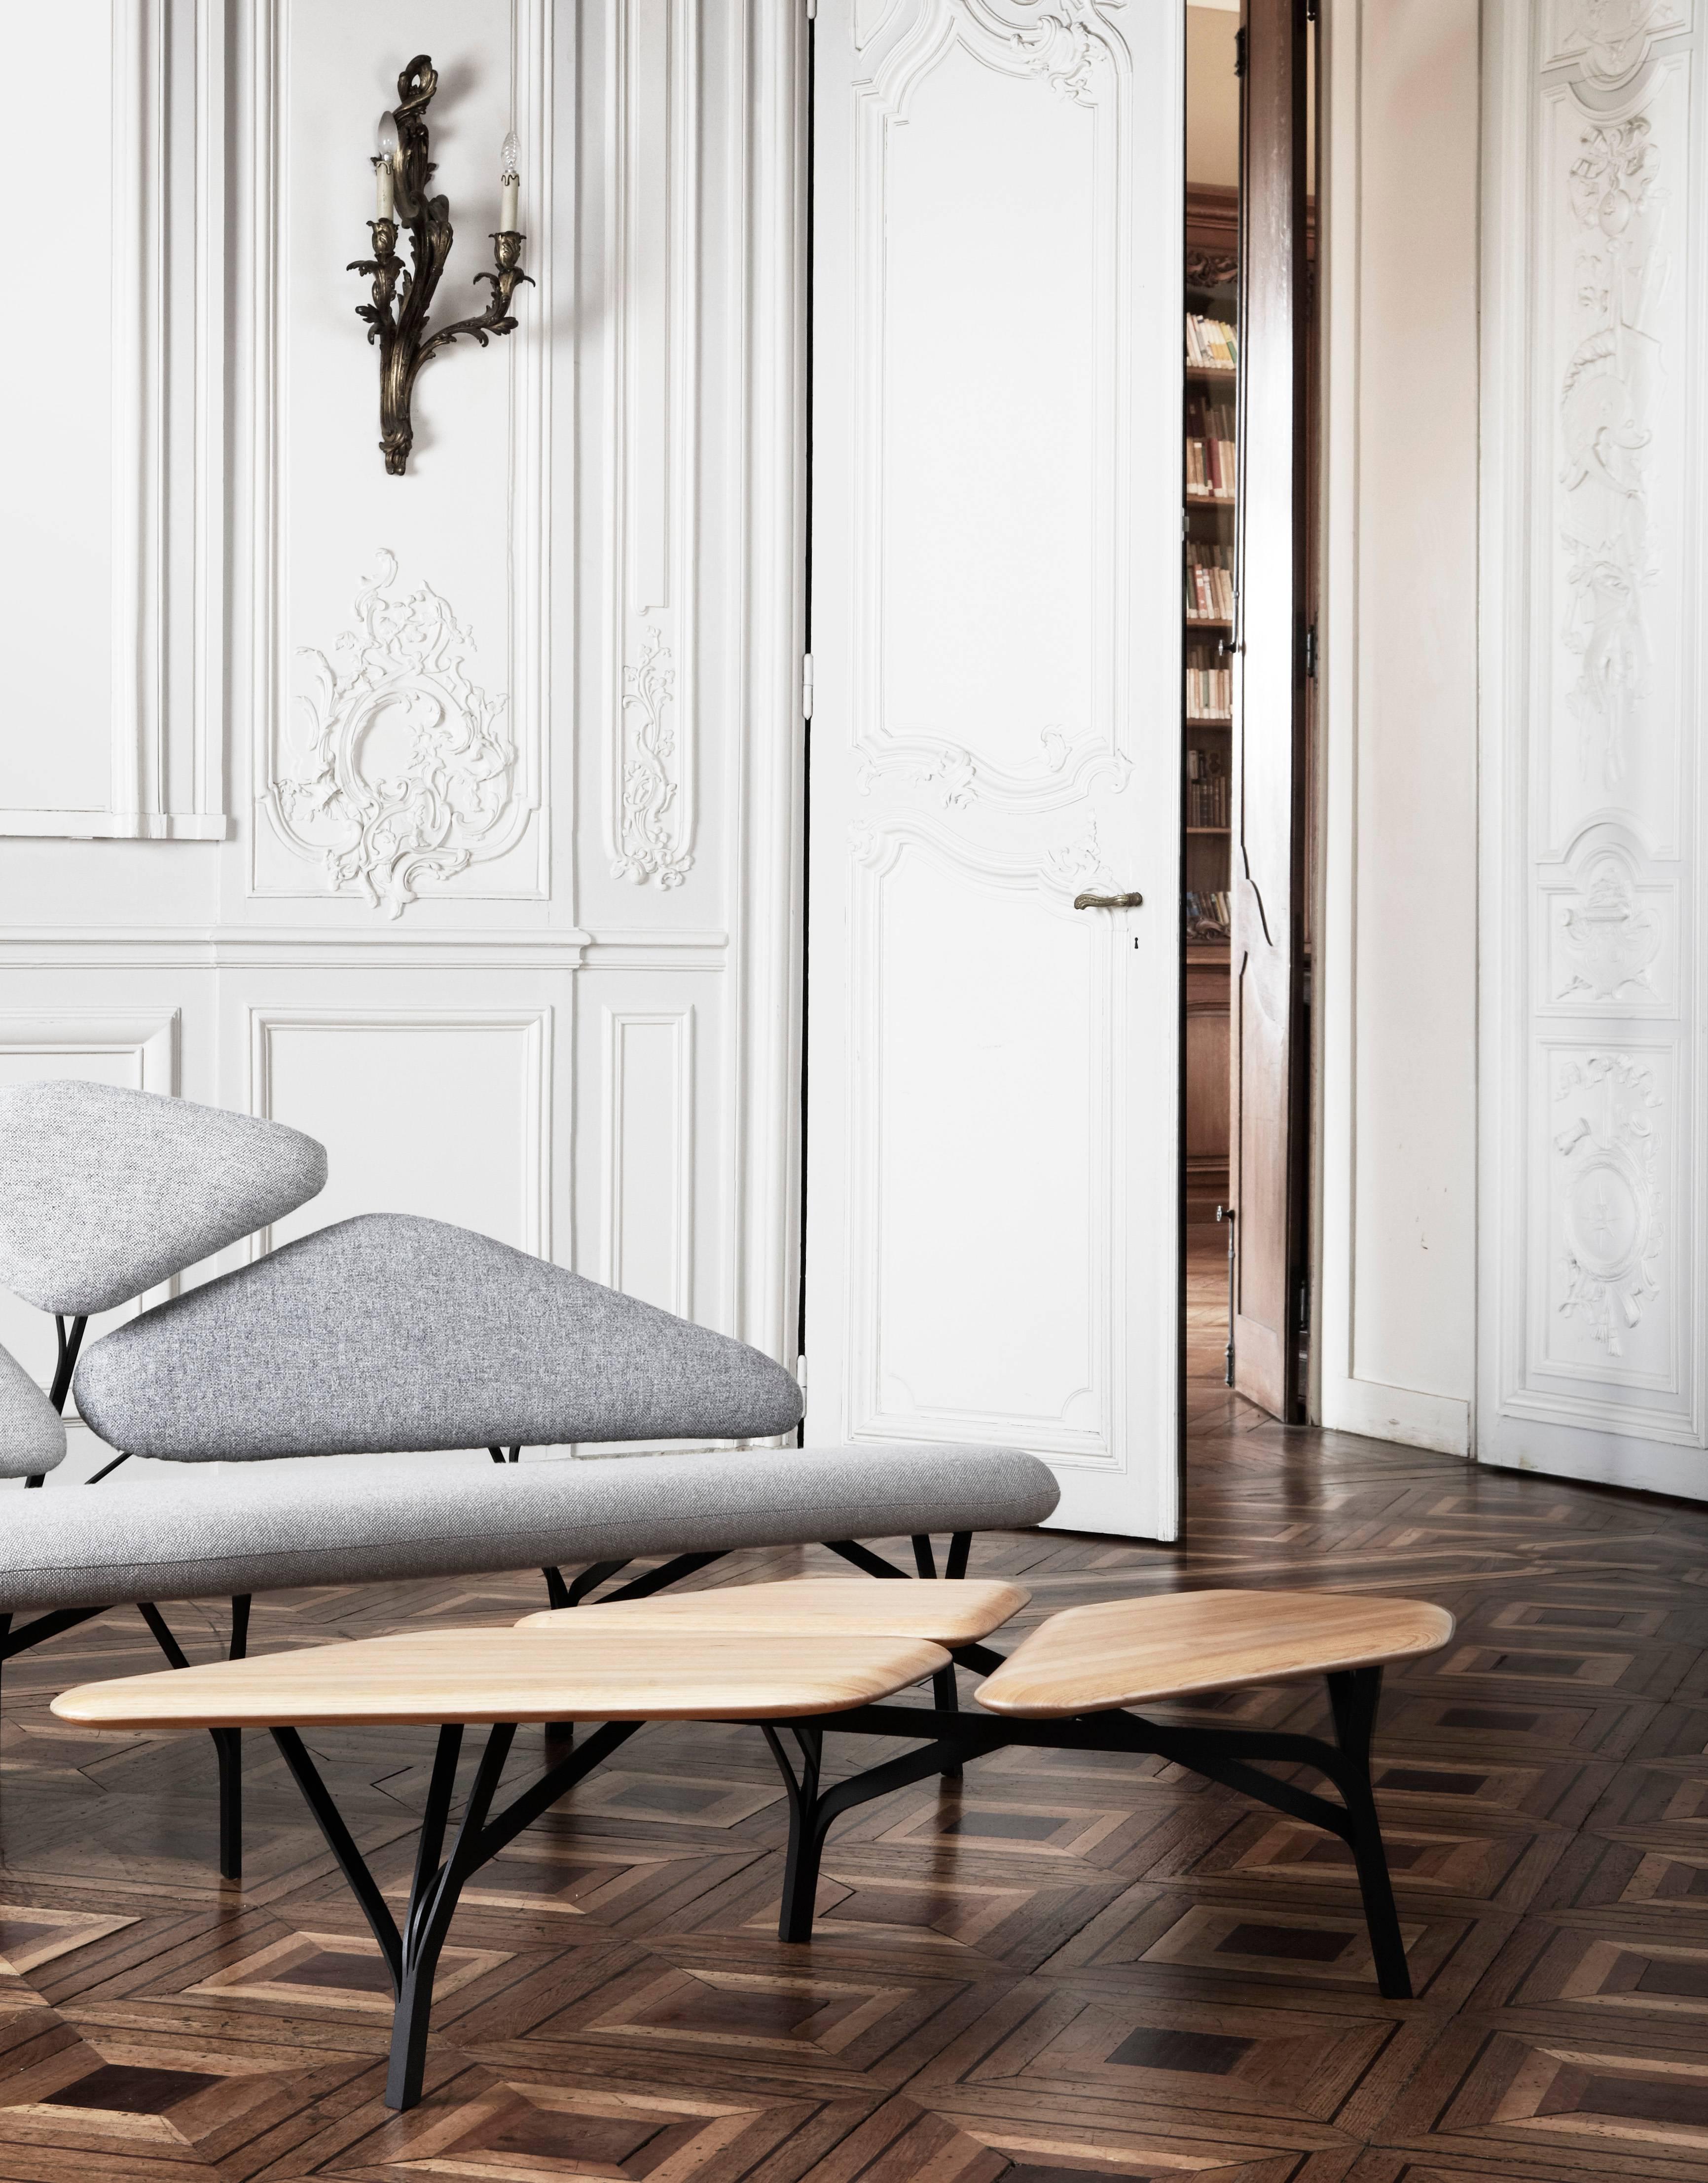 Borghese coffee table by Noé Duchaufour-Lawrance.

Dimensions: 35 x 139 x 64 cm.
Solid oak tabletop, steel structure.
Mat black stained wood.

Noé Duchaufour Lawrance started his career as a sculptor and used all his gifts to create the